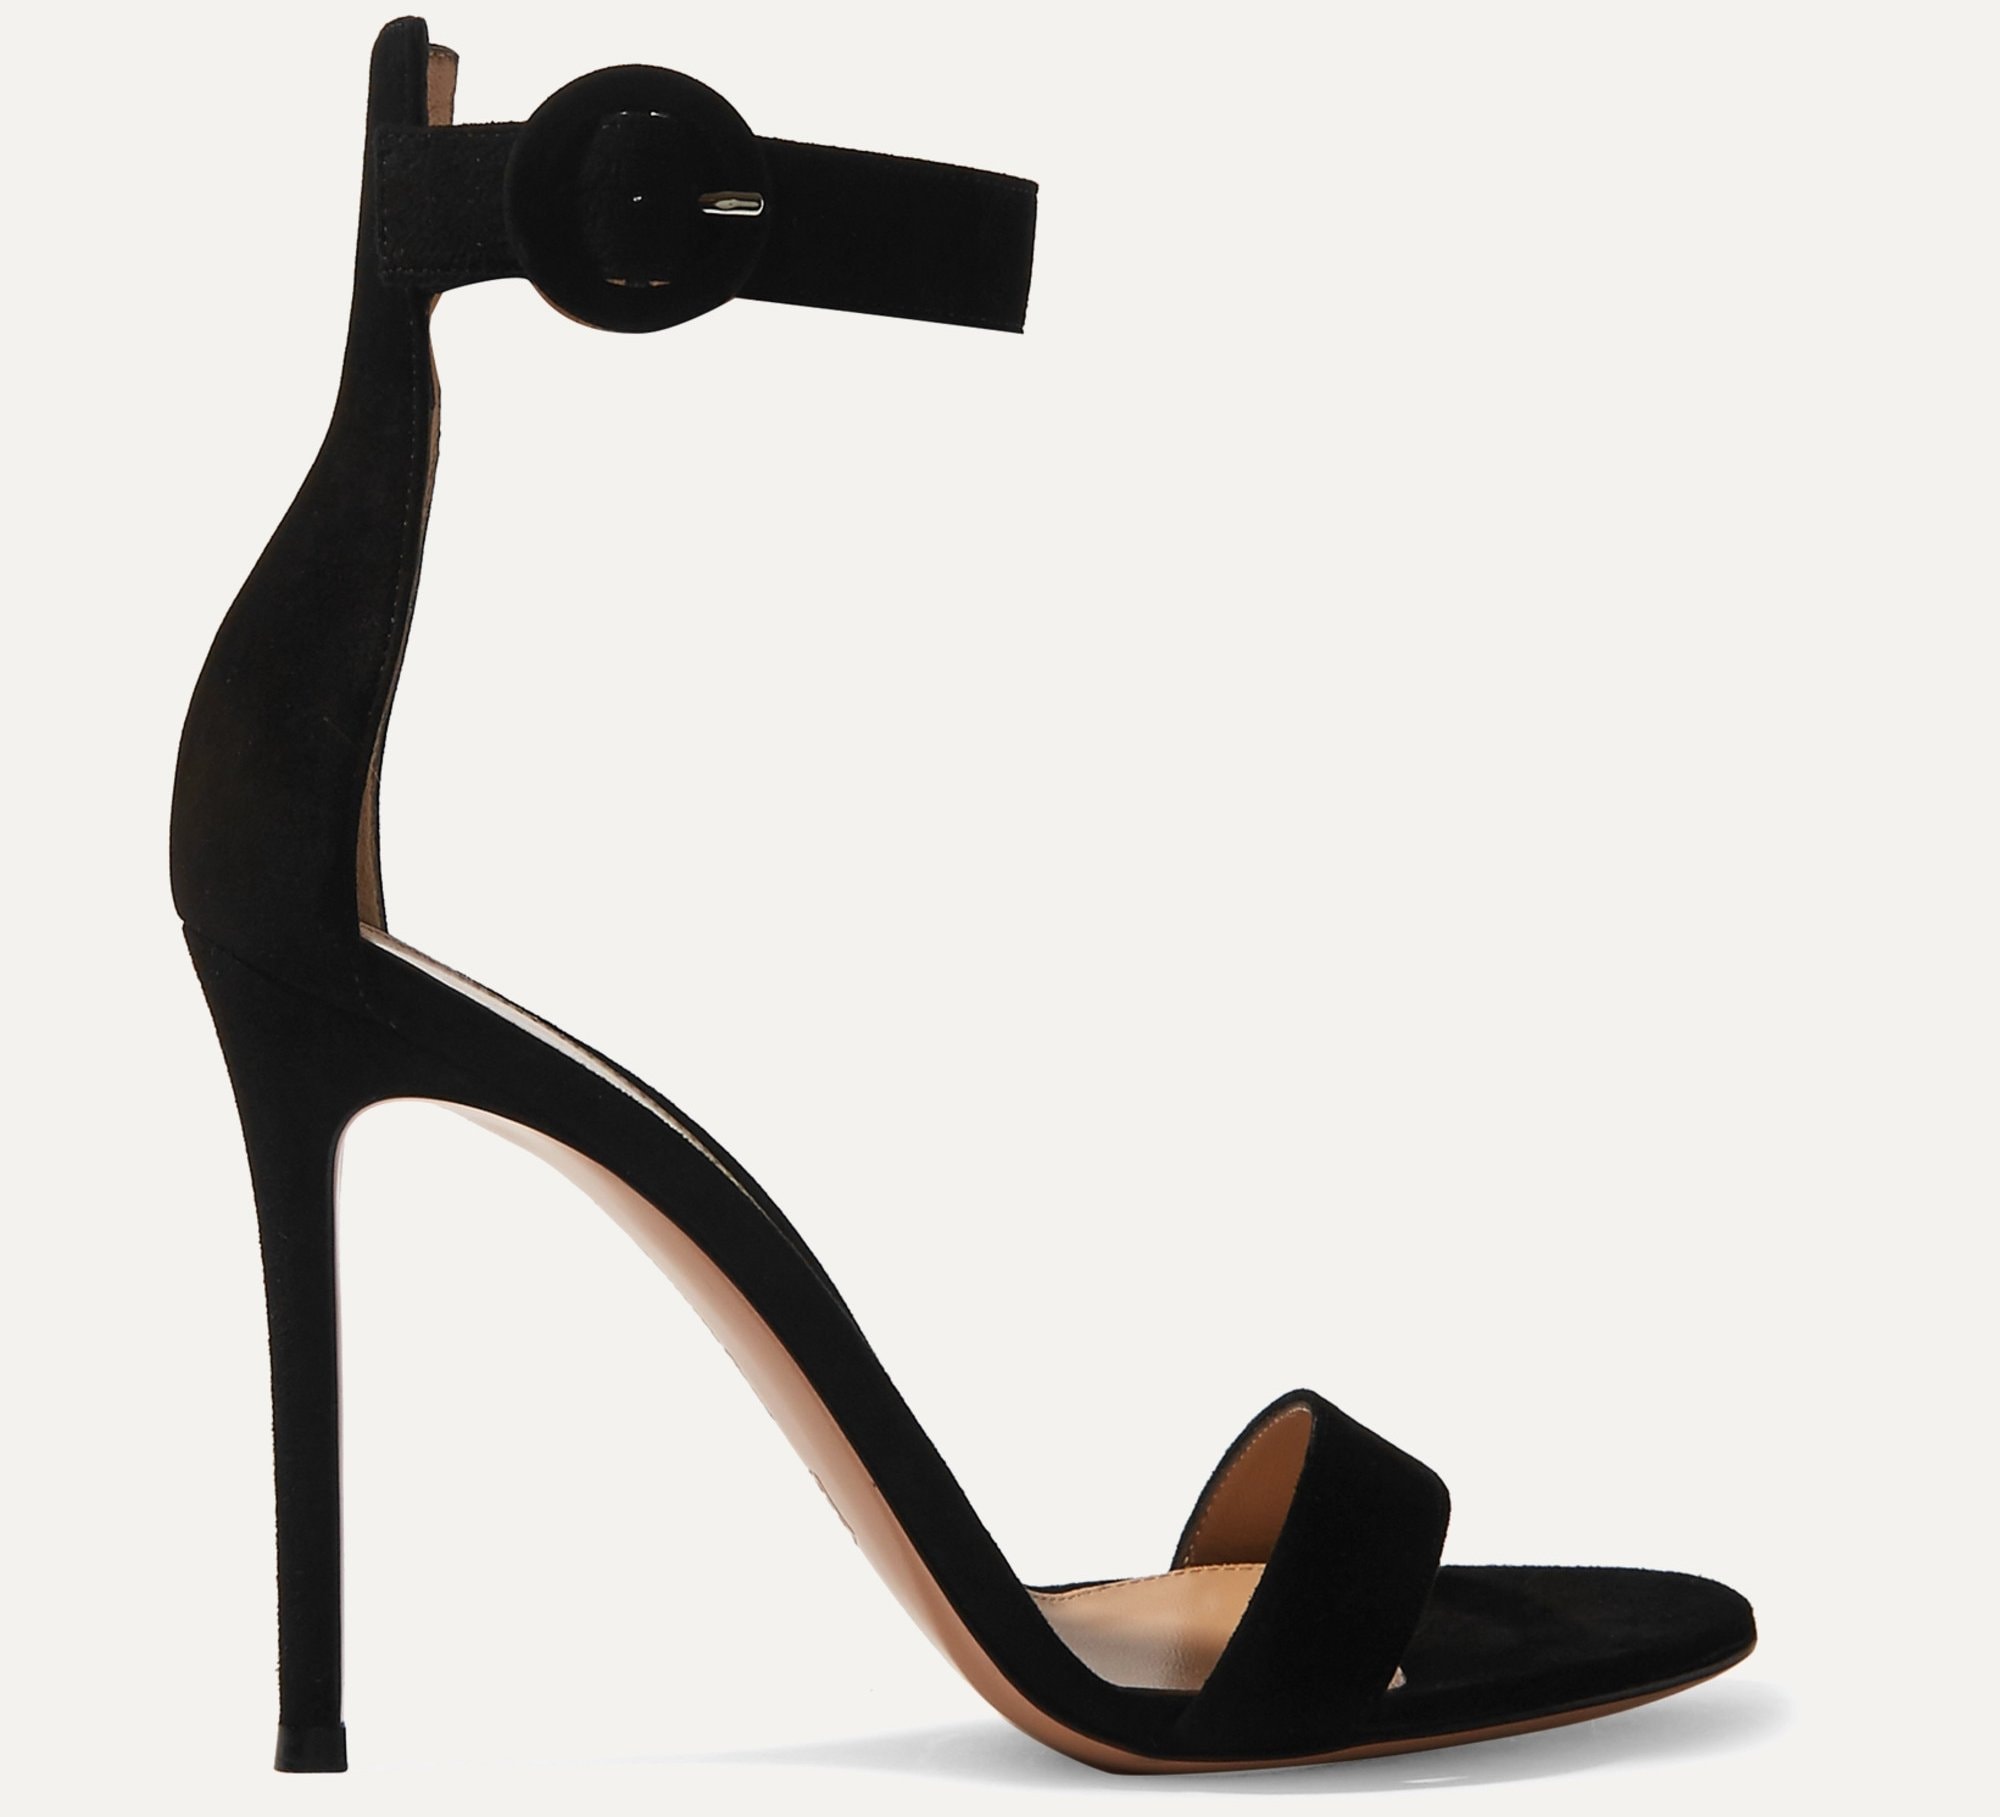 A classic pair of sandals made of black suede with '60s round buckle and high stiletto heels